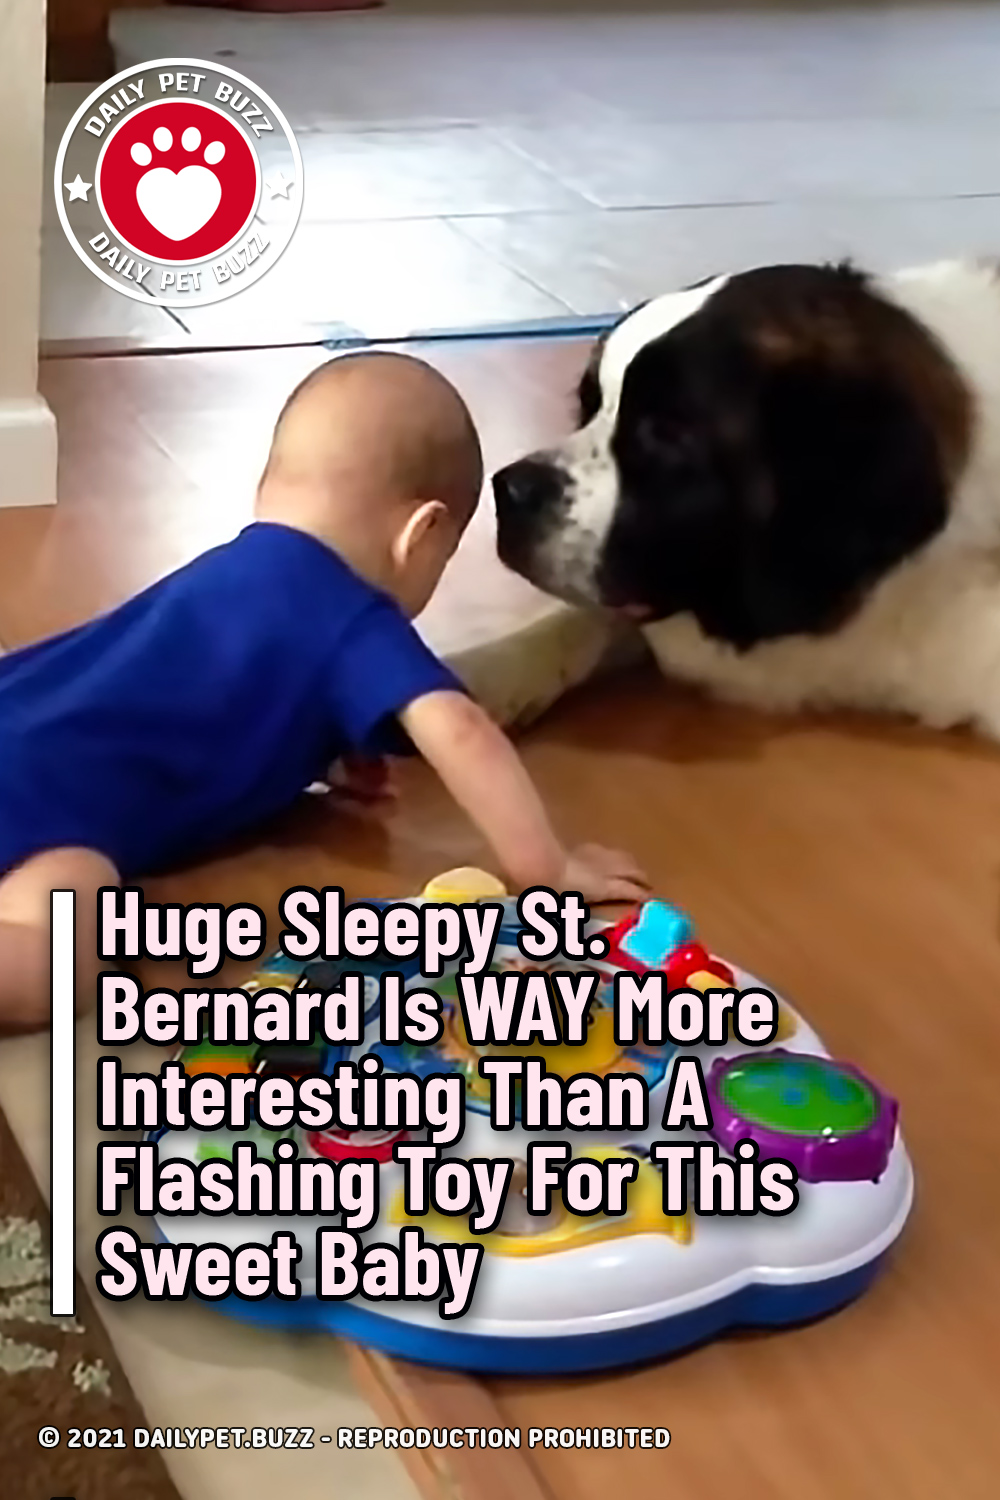 Huge Sleepy St. Bernard Is WAY More Interesting Than A Flashing Toy For This Sweet Baby